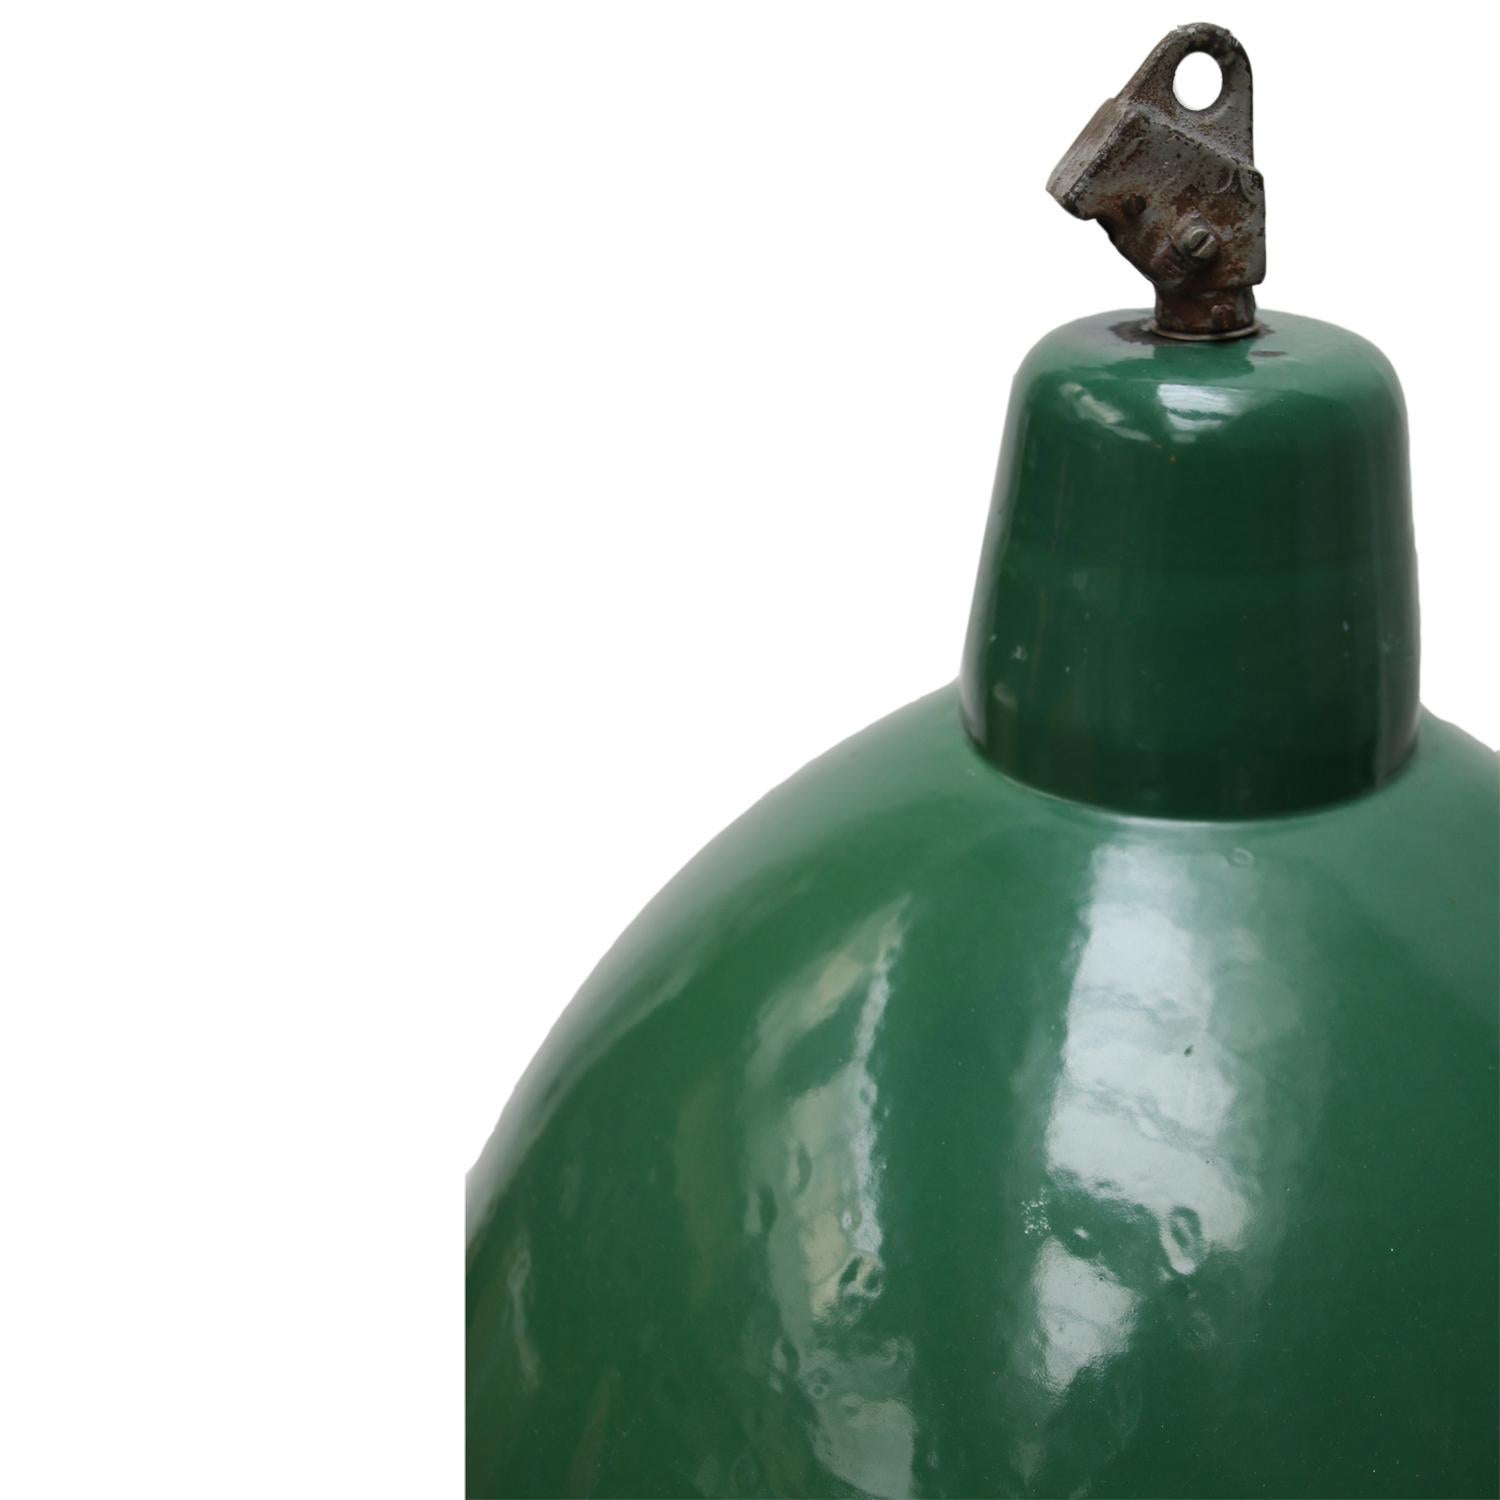 Extra large Industrial Classic used in warehouses and factories.
Green enamel, cast iron hook

Weight: 3.0 kg / 6.6 lb.

All lamps have been made suitable by international standards for incandescent light bulbs, energy-efficient and LED bulbs.